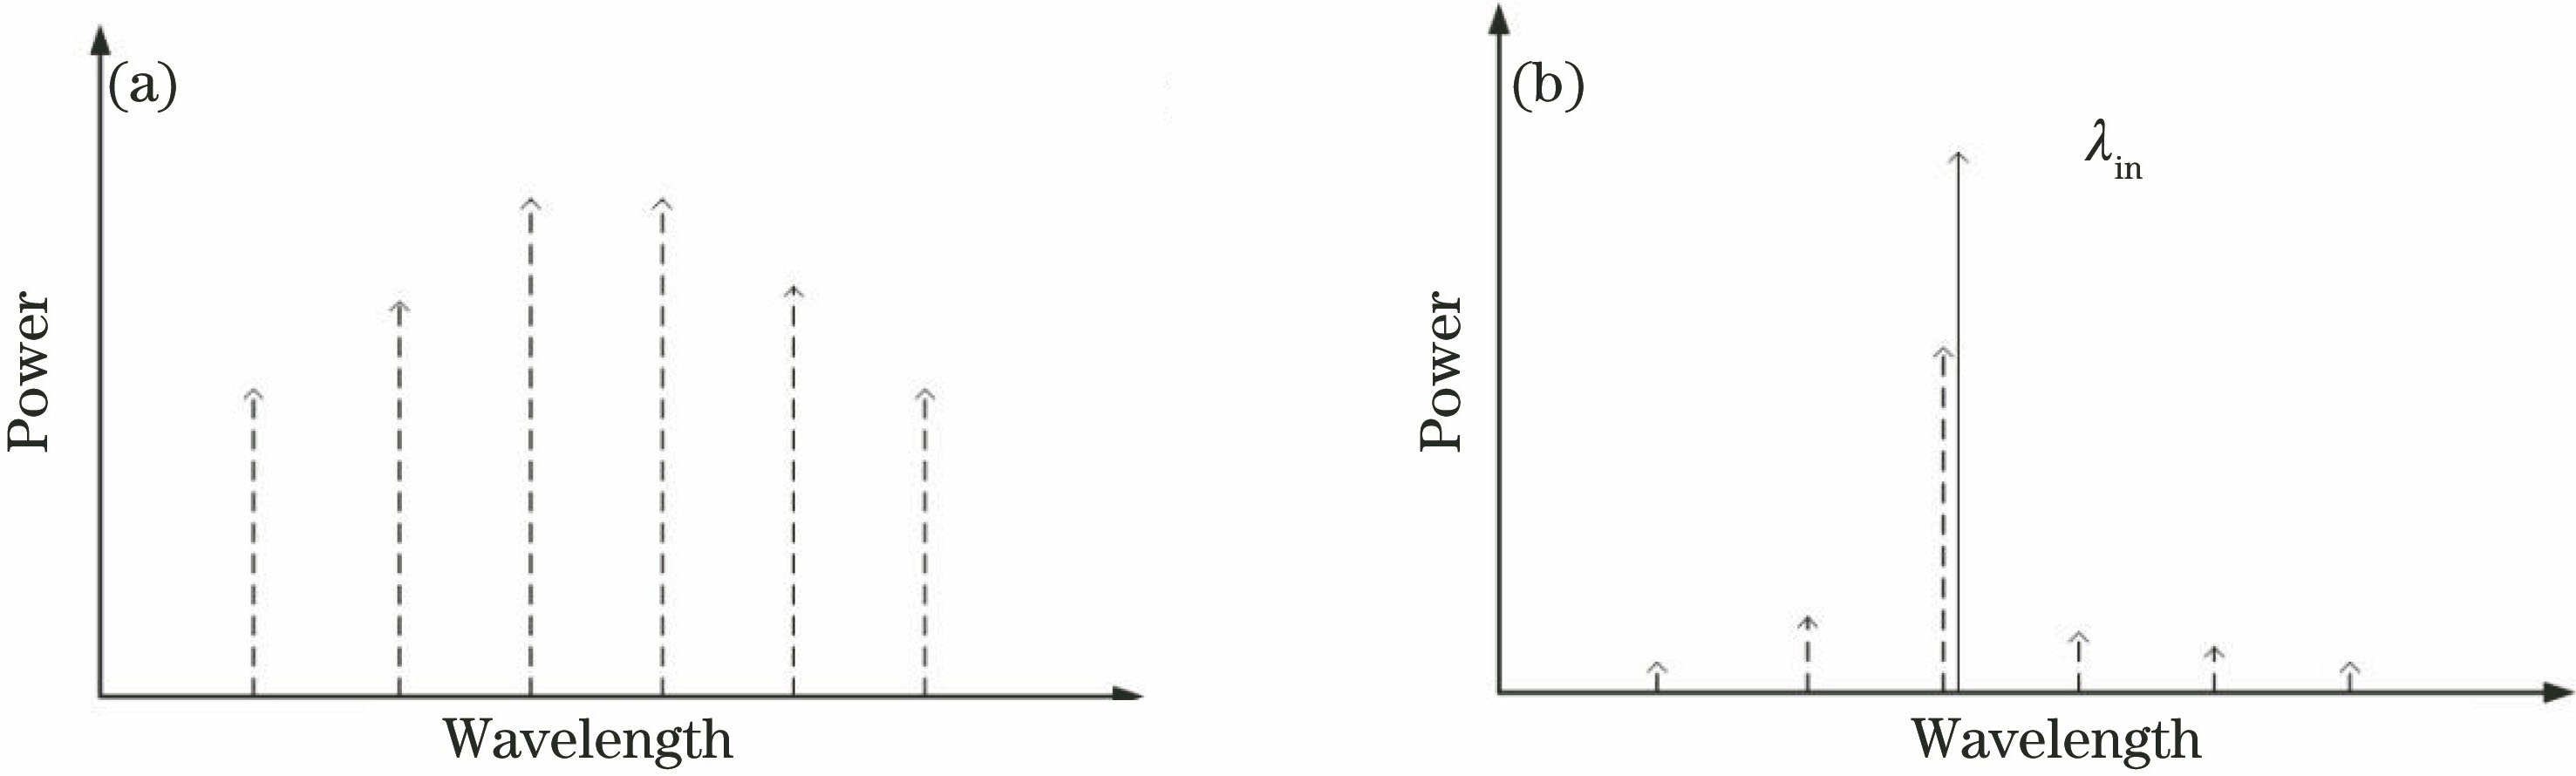 (a) Spectrum of F-P laser; (b) injection locking of F-P laser